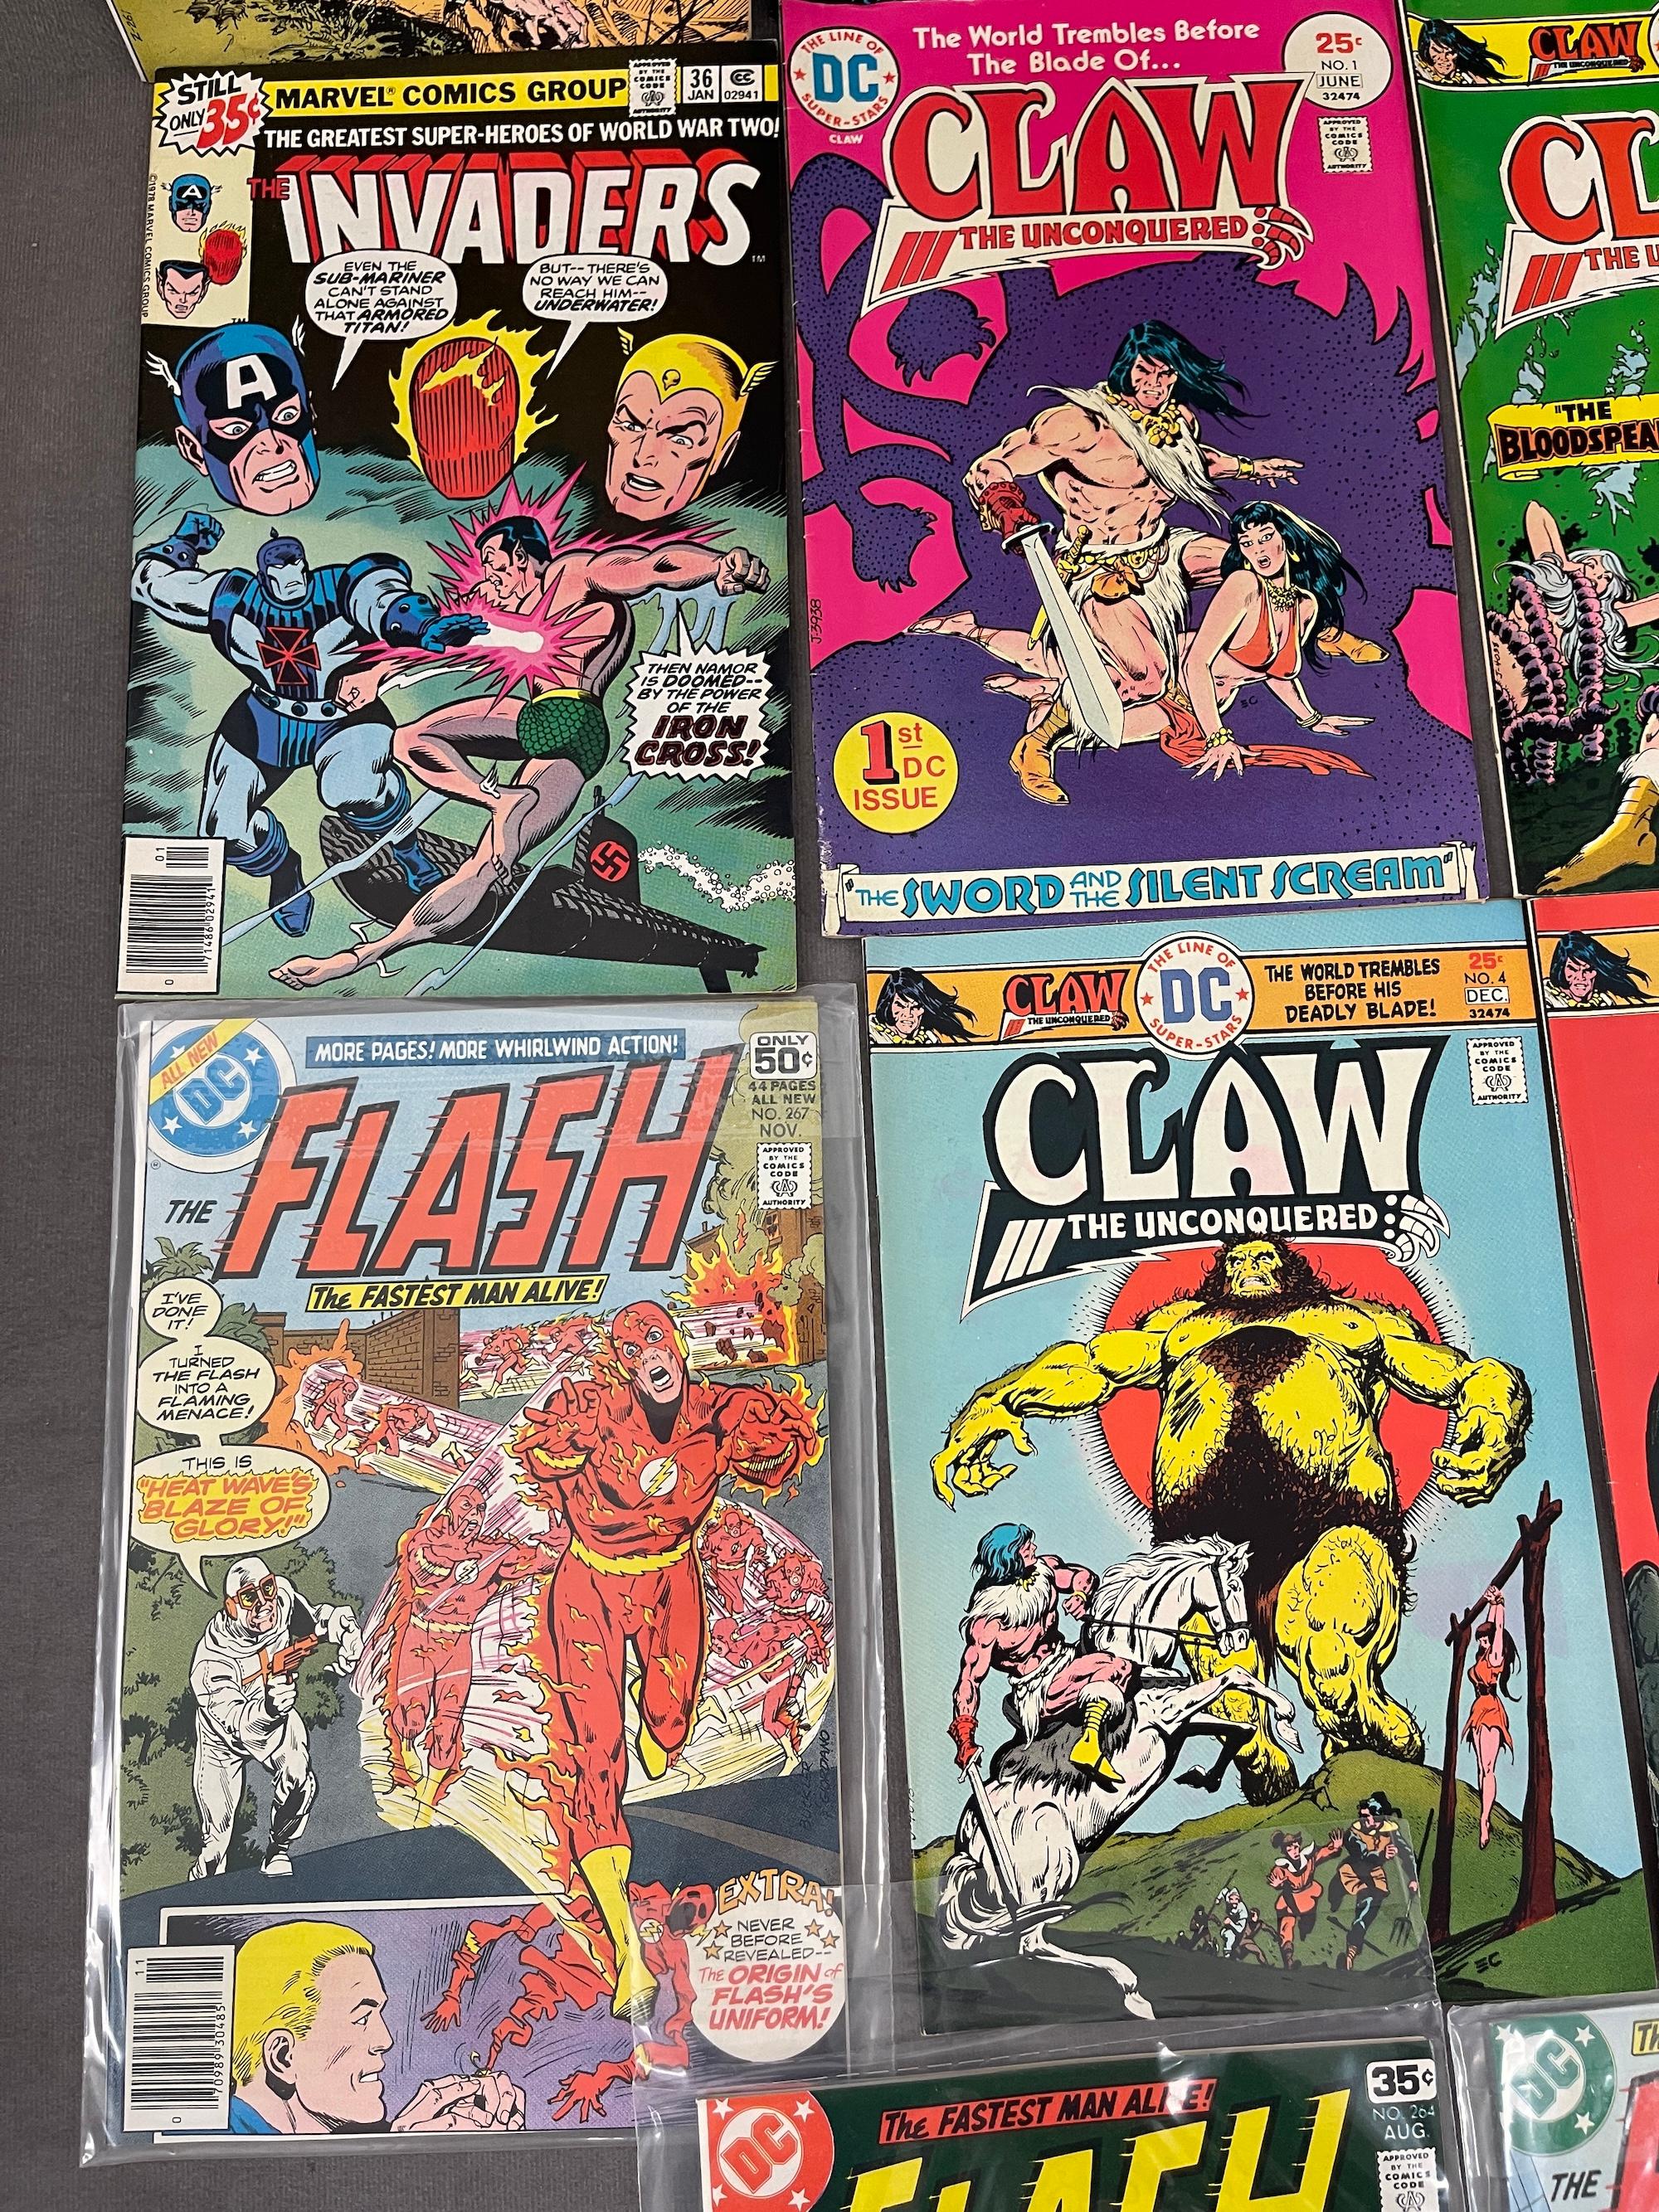 VINTAGE COMIC BOOK COLLECTION SHADOW CLAW FLASH DC COMICS LOT 18